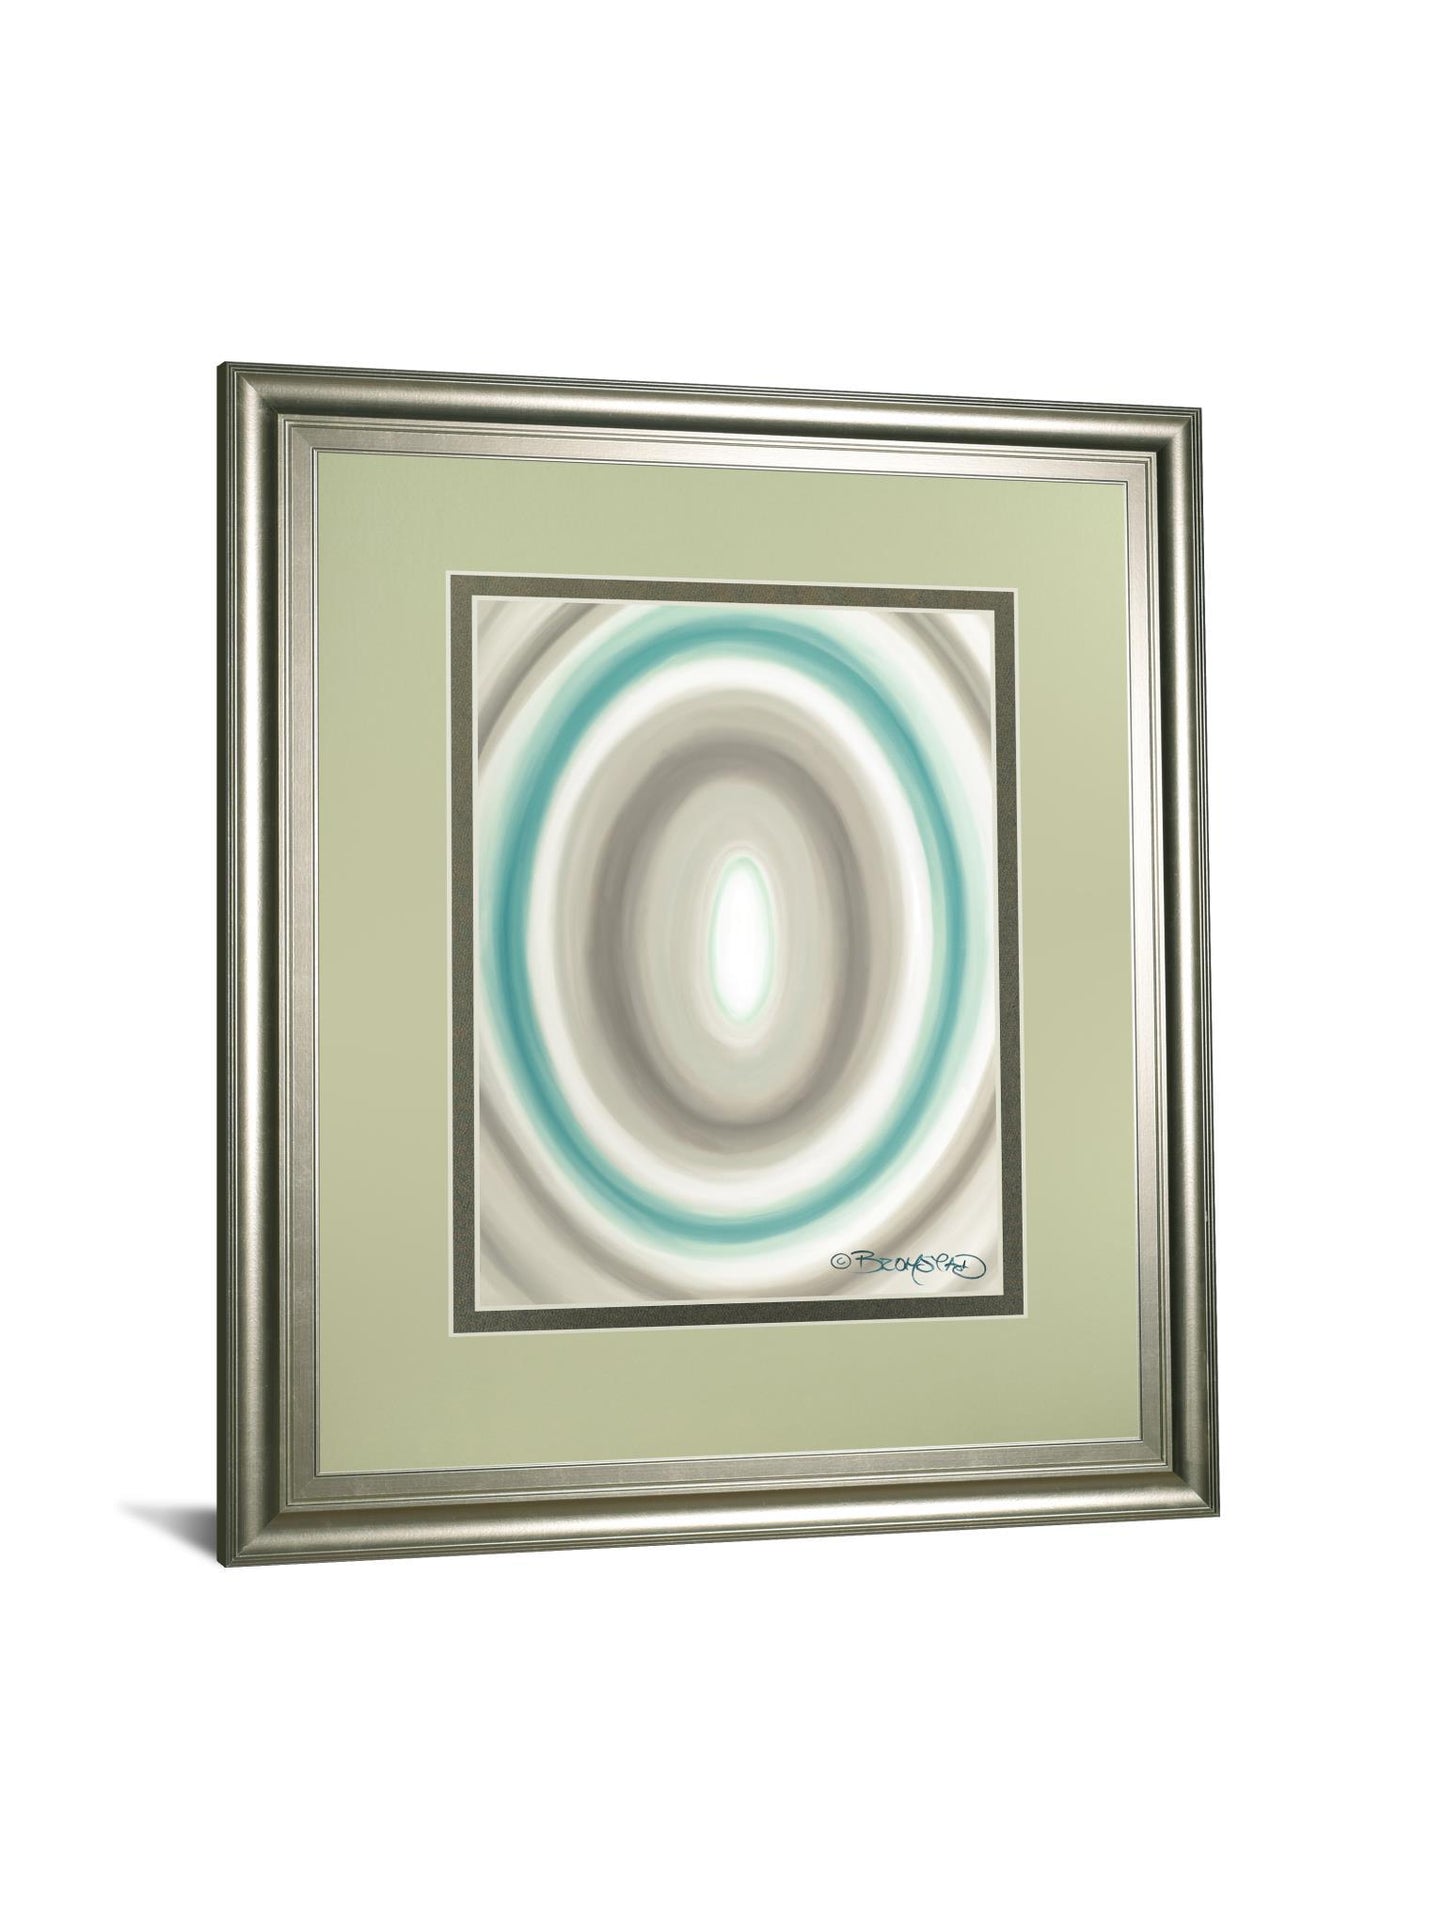 Concentric Ovals #1 By David Bromstad - Framed Print Wall Art - Blue